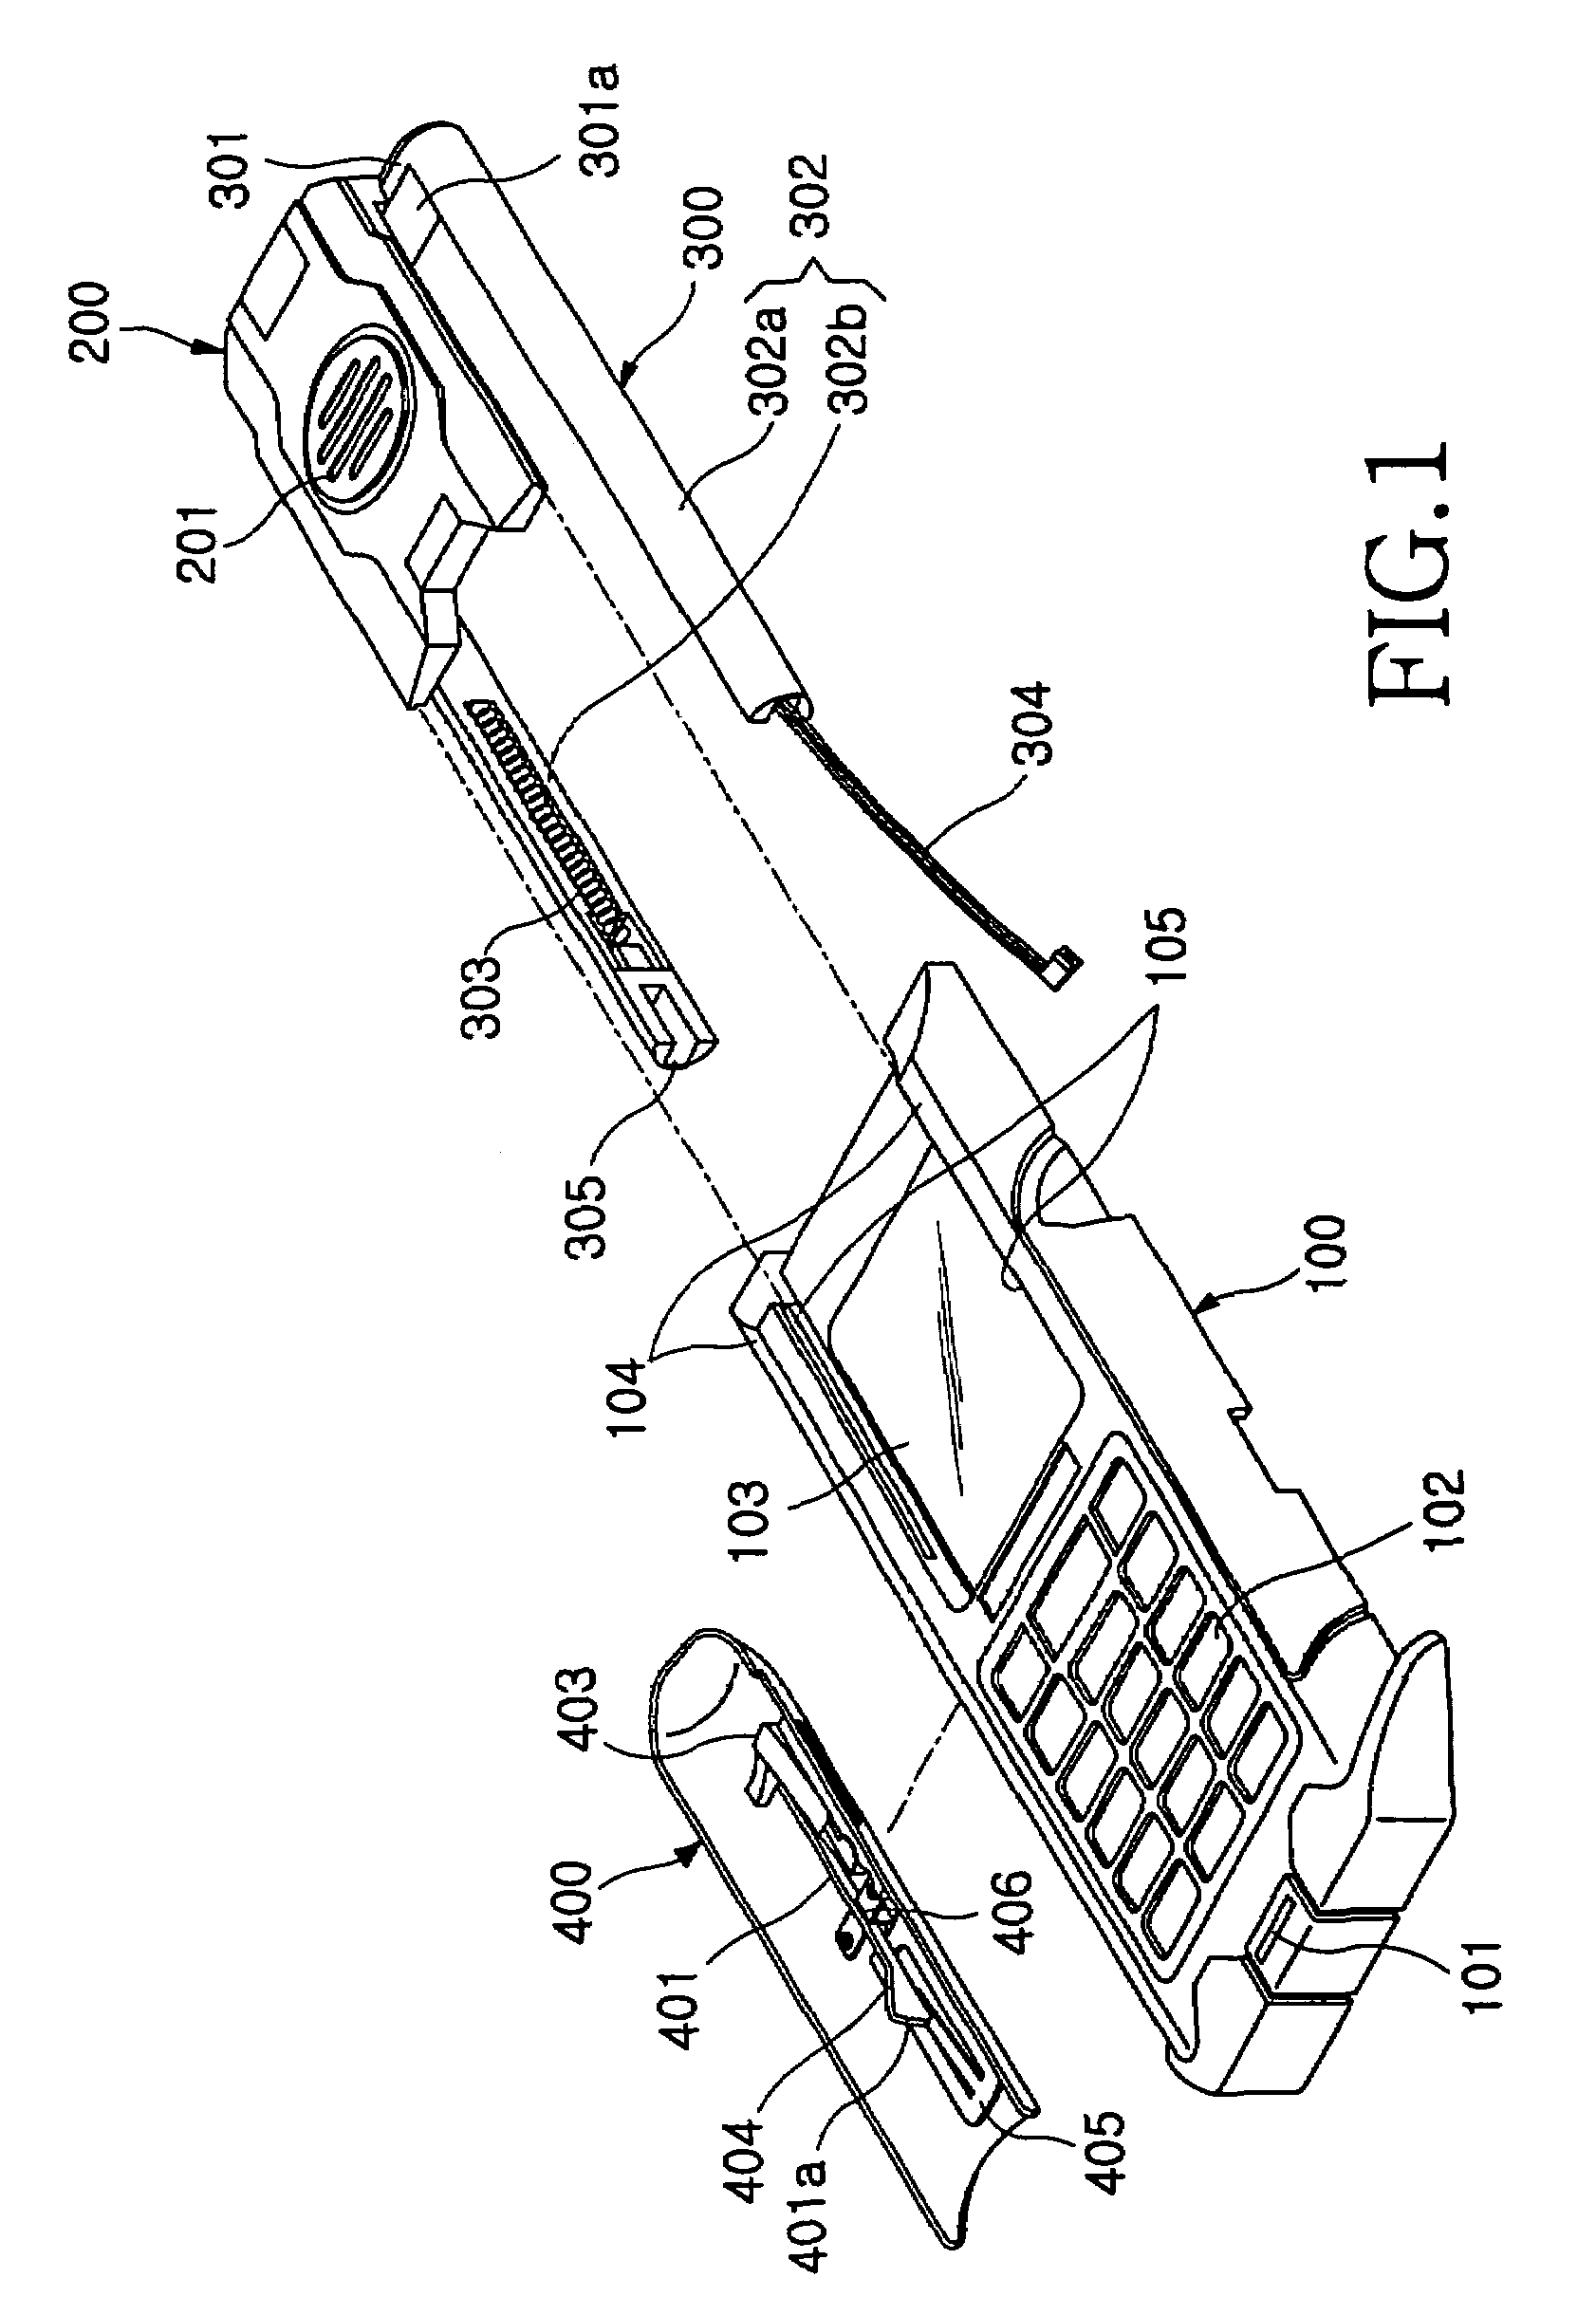 Mobile communication device with slide portion